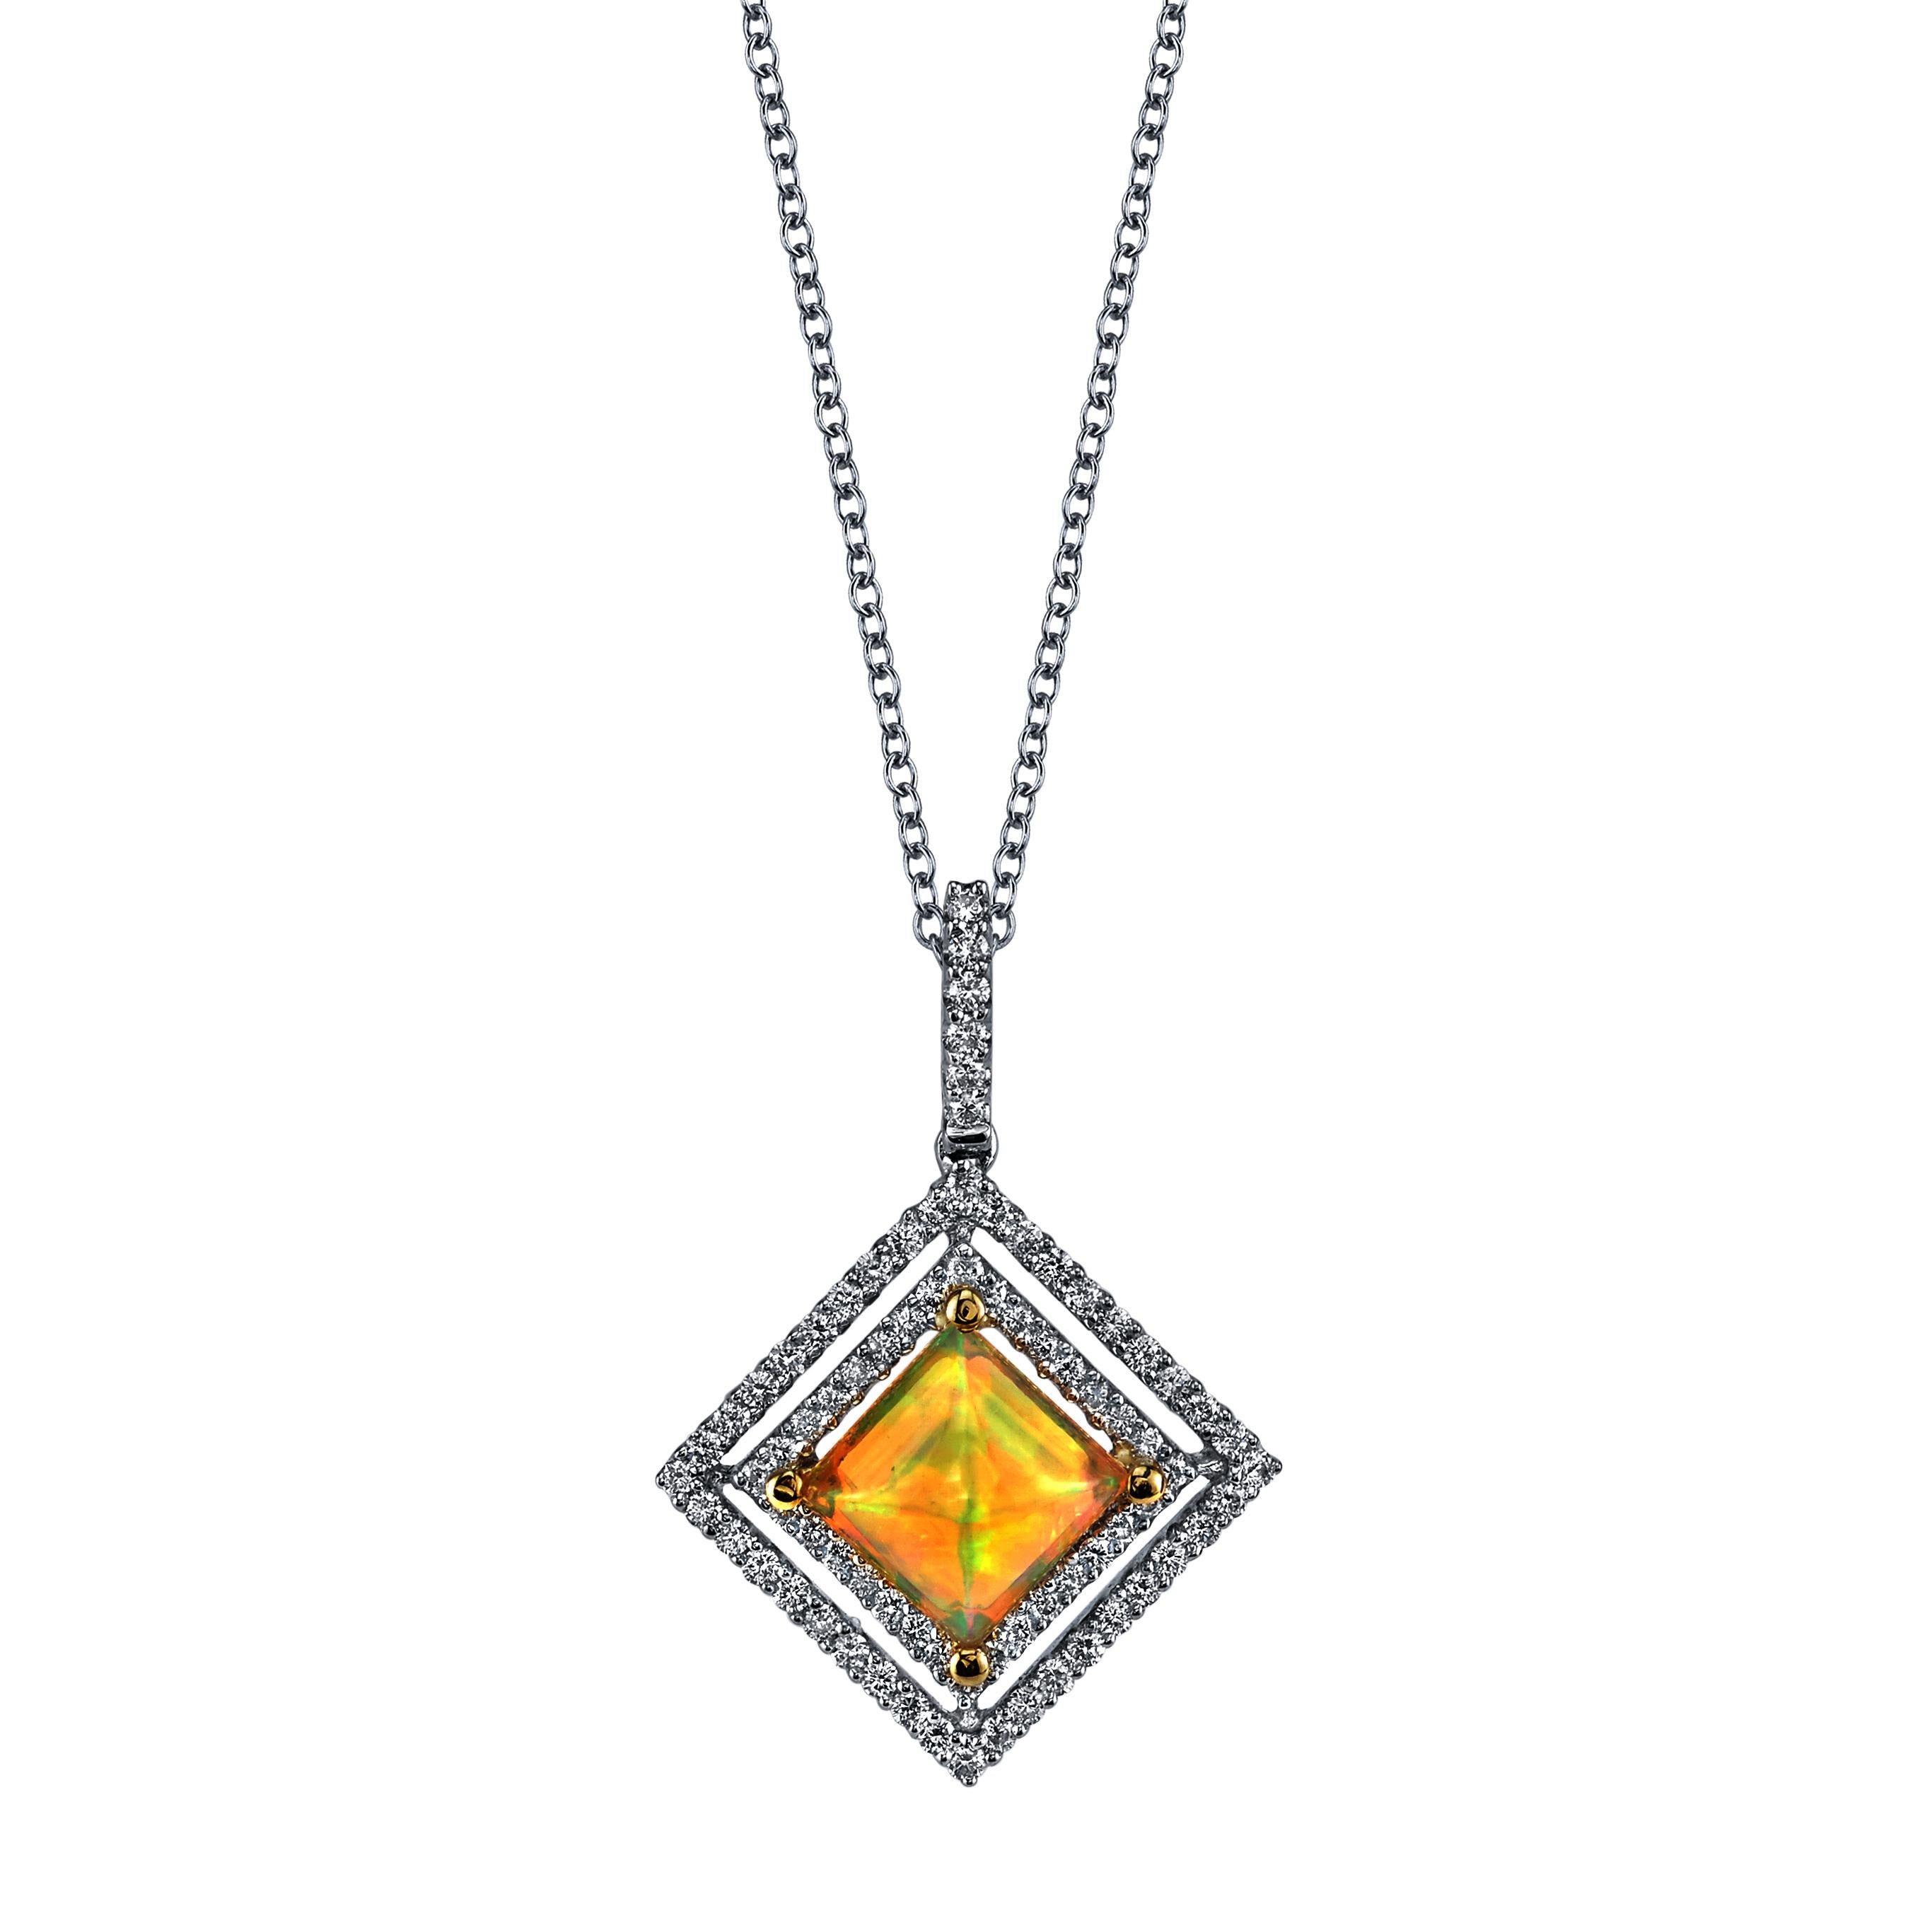 Opals are nature's kaleidoscope and as such, they go with any color of clothing and all complexions! This necklace features a beautiful golden Ethiopian opal cabochon with an unusual square shape, framed by a brilliant double halo of white diamonds.